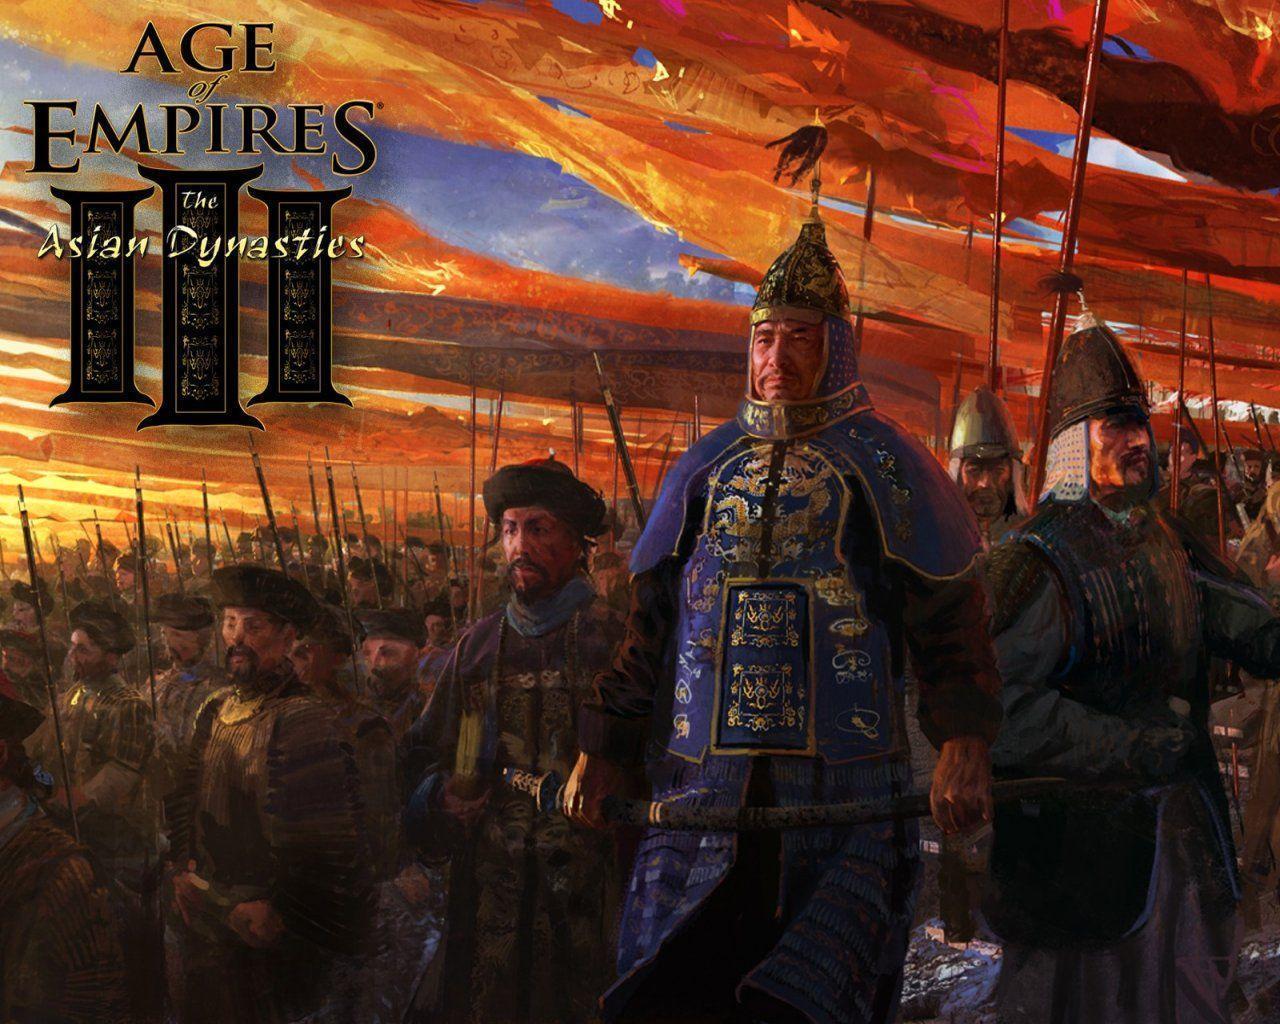 Wallpaper Age of Empires Age of Empires 3 Games Image